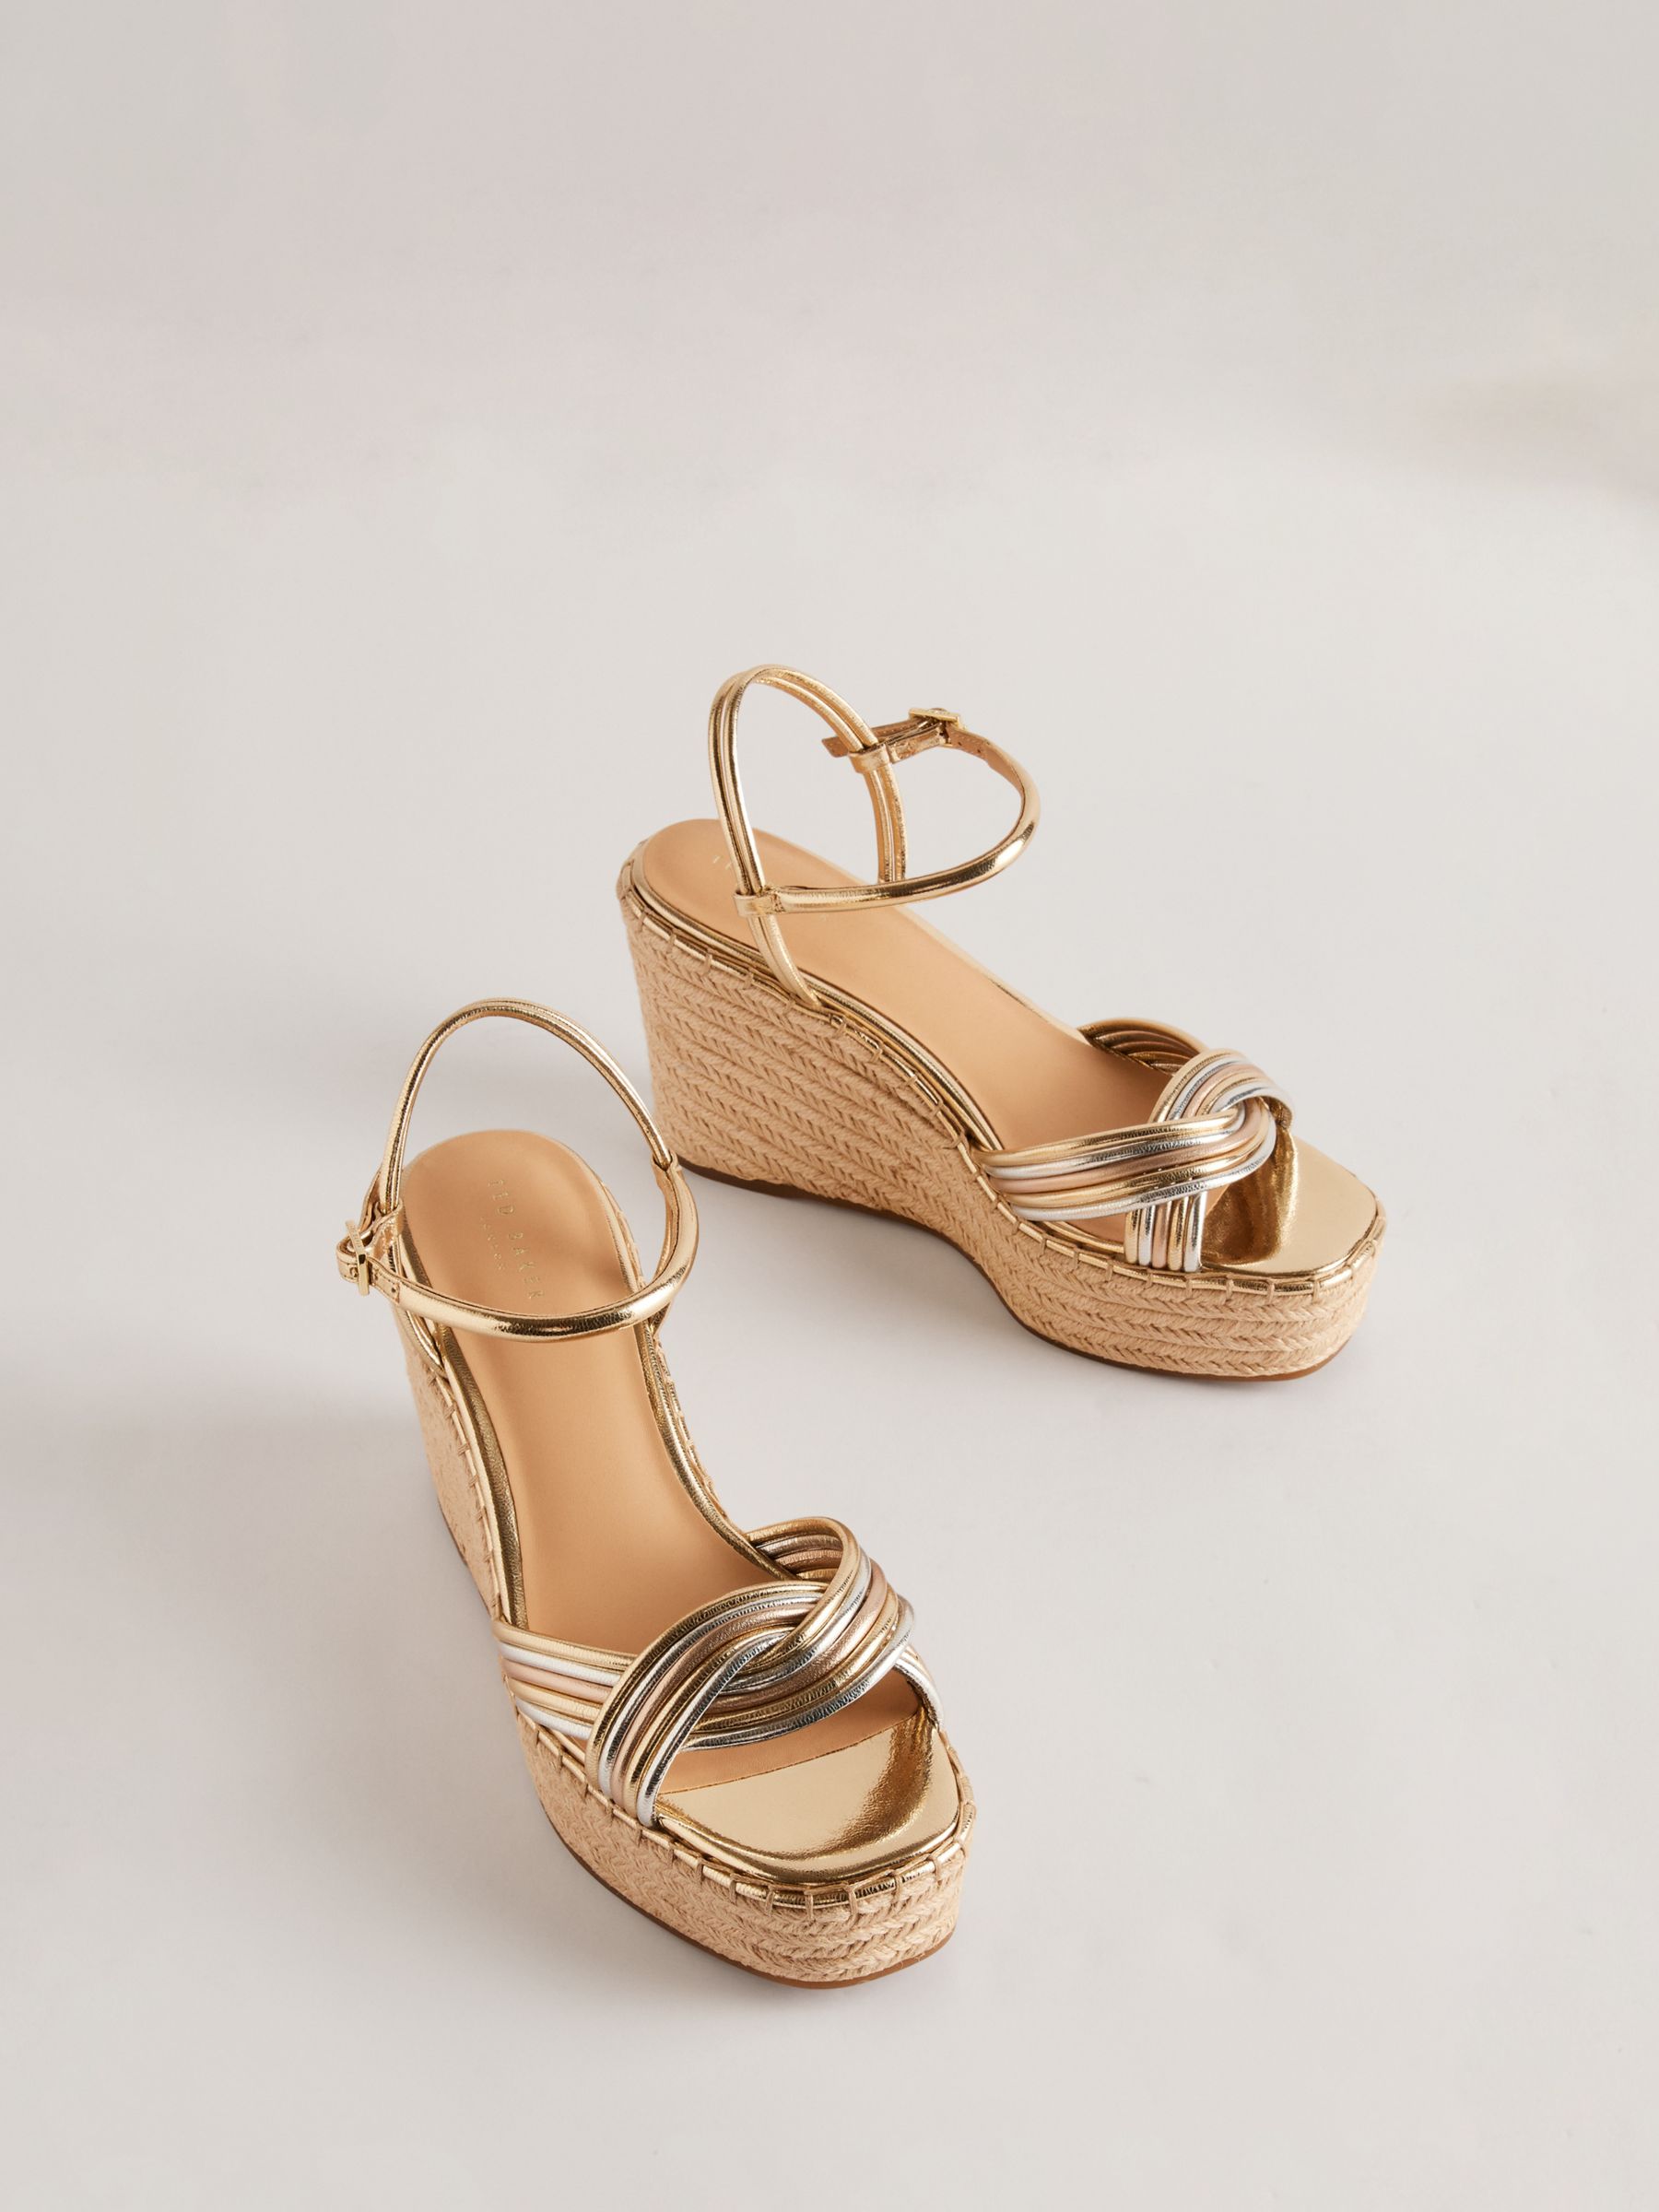 Ted Baker Amaalia Cross Strap Leather Wedge Sandals, Rose Gold/Silver, EU37